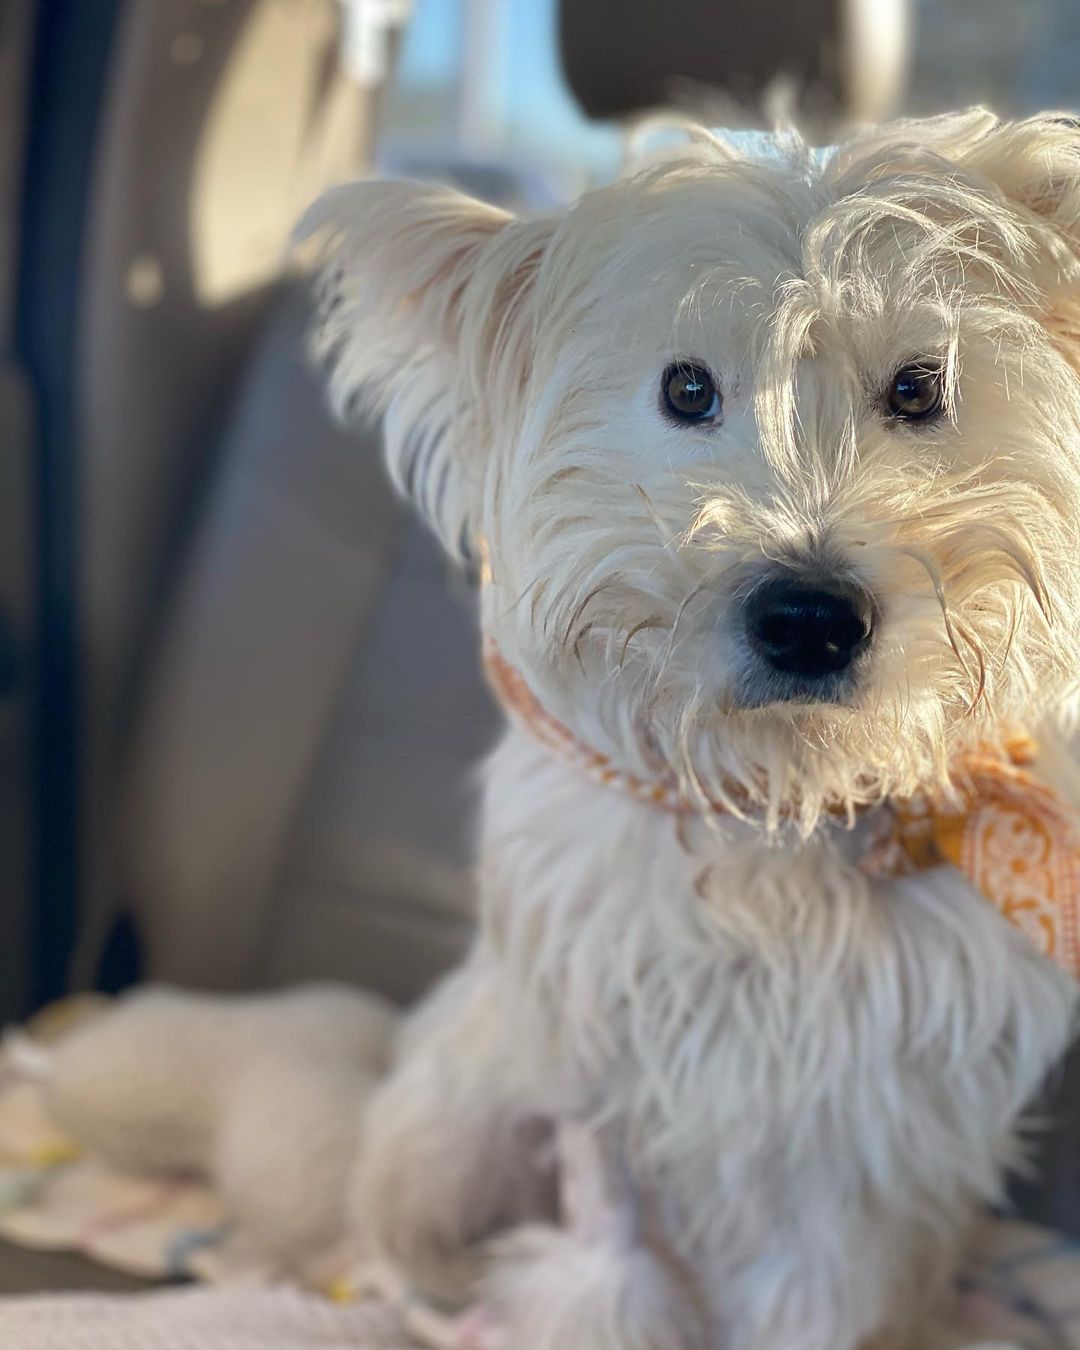 We are on our way to Desert Veterinary Medical Specialist to see Dr. Riebsche in internal medecine in the hopes that we can help sweet Cannoli!

•
•
•

littlelotusrescueandsanctuary.org
Venmo: LLR-Littlelotusrescue
PayPal: littlelotusrescue@gmail.com

<a target='_blank' href='https://www.instagram.com/explore/tags/littlelotusrescueandsanctuary/'>#littlelotusrescueandsanctuary</a> <a target='_blank' href='https://www.instagram.com/explore/tags/lotushaus/'>#lotushaus</a><a target='_blank' href='https://www.instagram.com/explore/tags/dogsofinstagram/'>#dogsofinstagram</a> <a target='_blank' href='https://www.instagram.com/explore/tags/ittakesavillage/'>#ittakesavillage</a> <a target='_blank' href='https://www.instagram.com/explore/tags/liveyourbestlife/'>#liveyourbestlife</a> <a target='_blank' href='https://www.instagram.com/explore/tags/rescuedog/'>#rescuedog</a> <a target='_blank' href='https://www.instagram.com/explore/tags/rescuedogofinstagram/'>#rescuedogofinstagram</a> <a target='_blank' href='https://www.instagram.com/explore/tags/bekind/'>#bekind</a> <a target='_blank' href='https://www.instagram.com/explore/tags/veterinarian/'>#veterinarian</a> <a target='_blank' href='https://www.instagram.com/explore/tags/tierarzt/'>#tierarzt</a> <a target='_blank' href='https://www.instagram.com/explore/tags/vettechlife/'>#vettechlife</a> <a target='_blank' href='https://www.instagram.com/explore/tags/help/'>#help</a>  <a target='_blank' href='https://www.instagram.com/explore/tags/tucson/'>#tucson</a> <a target='_blank' href='https://www.instagram.com/explore/tags/arizona/'>#arizona</a> <a target='_blank' href='https://www.instagram.com/explore/tags/instagood/'>#instagood</a> <a target='_blank' href='https://www.instagram.com/explore/tags/hund/'>#hund</a> <a target='_blank' href='https://www.instagram.com/explore/tags/tiere/'>#tiere</a> <a target='_blank' href='https://www.instagram.com/explore/tags/Sorgenkind/'>#Sorgenkind</a> <a target='_blank' href='https://www.instagram.com/explore/tags/betheirvoice/'>#betheirvoice</a> <a target='_blank' href='https://www.instagram.com/explore/tags/voiceforthevoiceless/'>#voiceforthevoiceless</a> <a target='_blank' href='https://www.instagram.com/explore/tags/valleyfever/'>#valleyfever</a> <a target='_blank' href='https://www.instagram.com/explore/tags/tickfever/'>#tickfever</a> <a target='_blank' href='https://www.instagram.com/explore/tags/internalmedicine/'>#internalmedicine</a> <a target='_blank' href='https://www.instagram.com/explore/tags/veterinarycardialogy/'>#veterinarycardialogy</a>